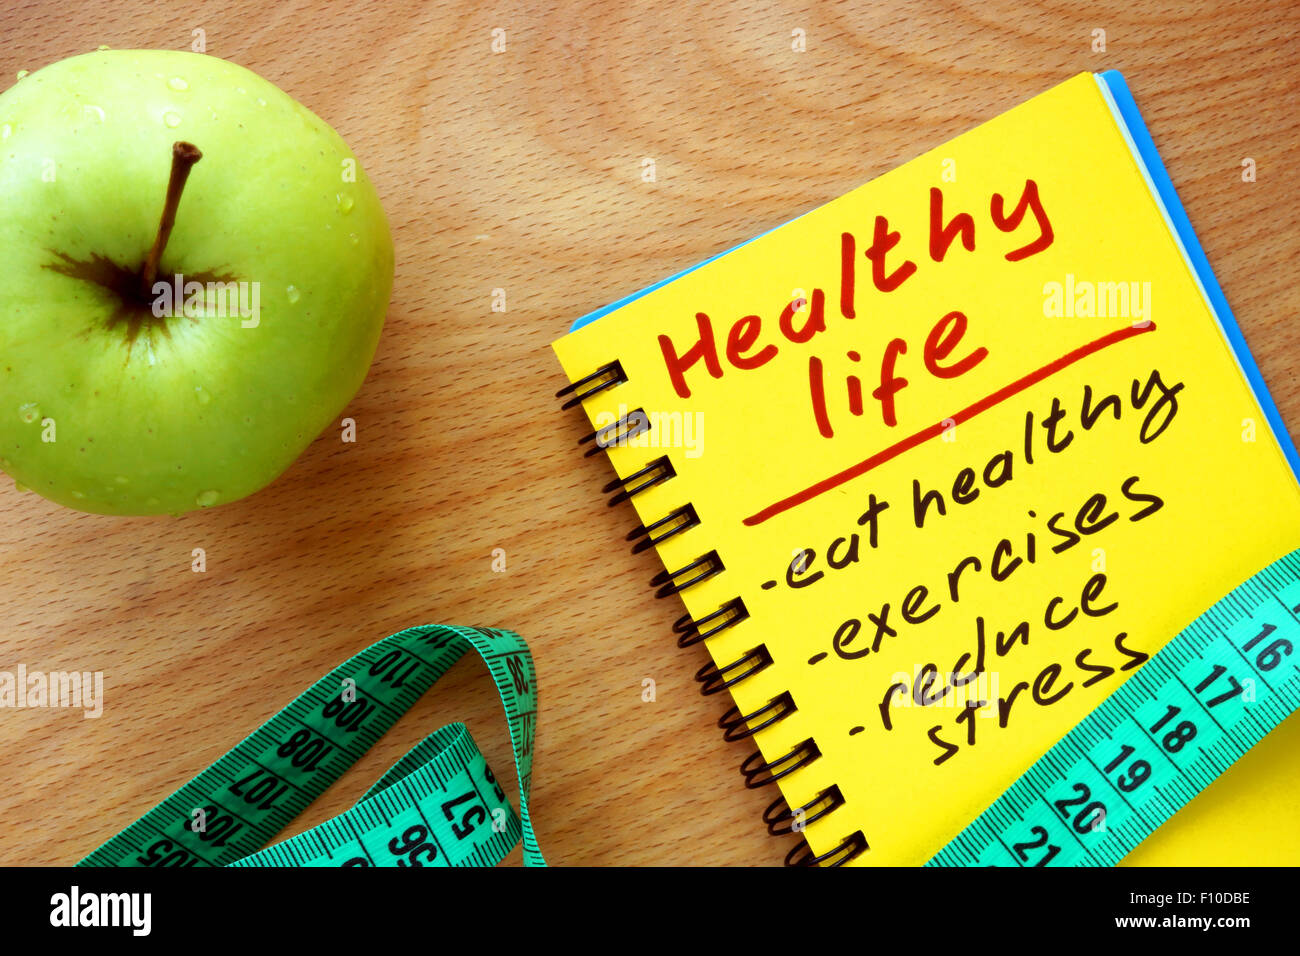 Notepad with healthy life guide, apple and measure tape Stock Photo